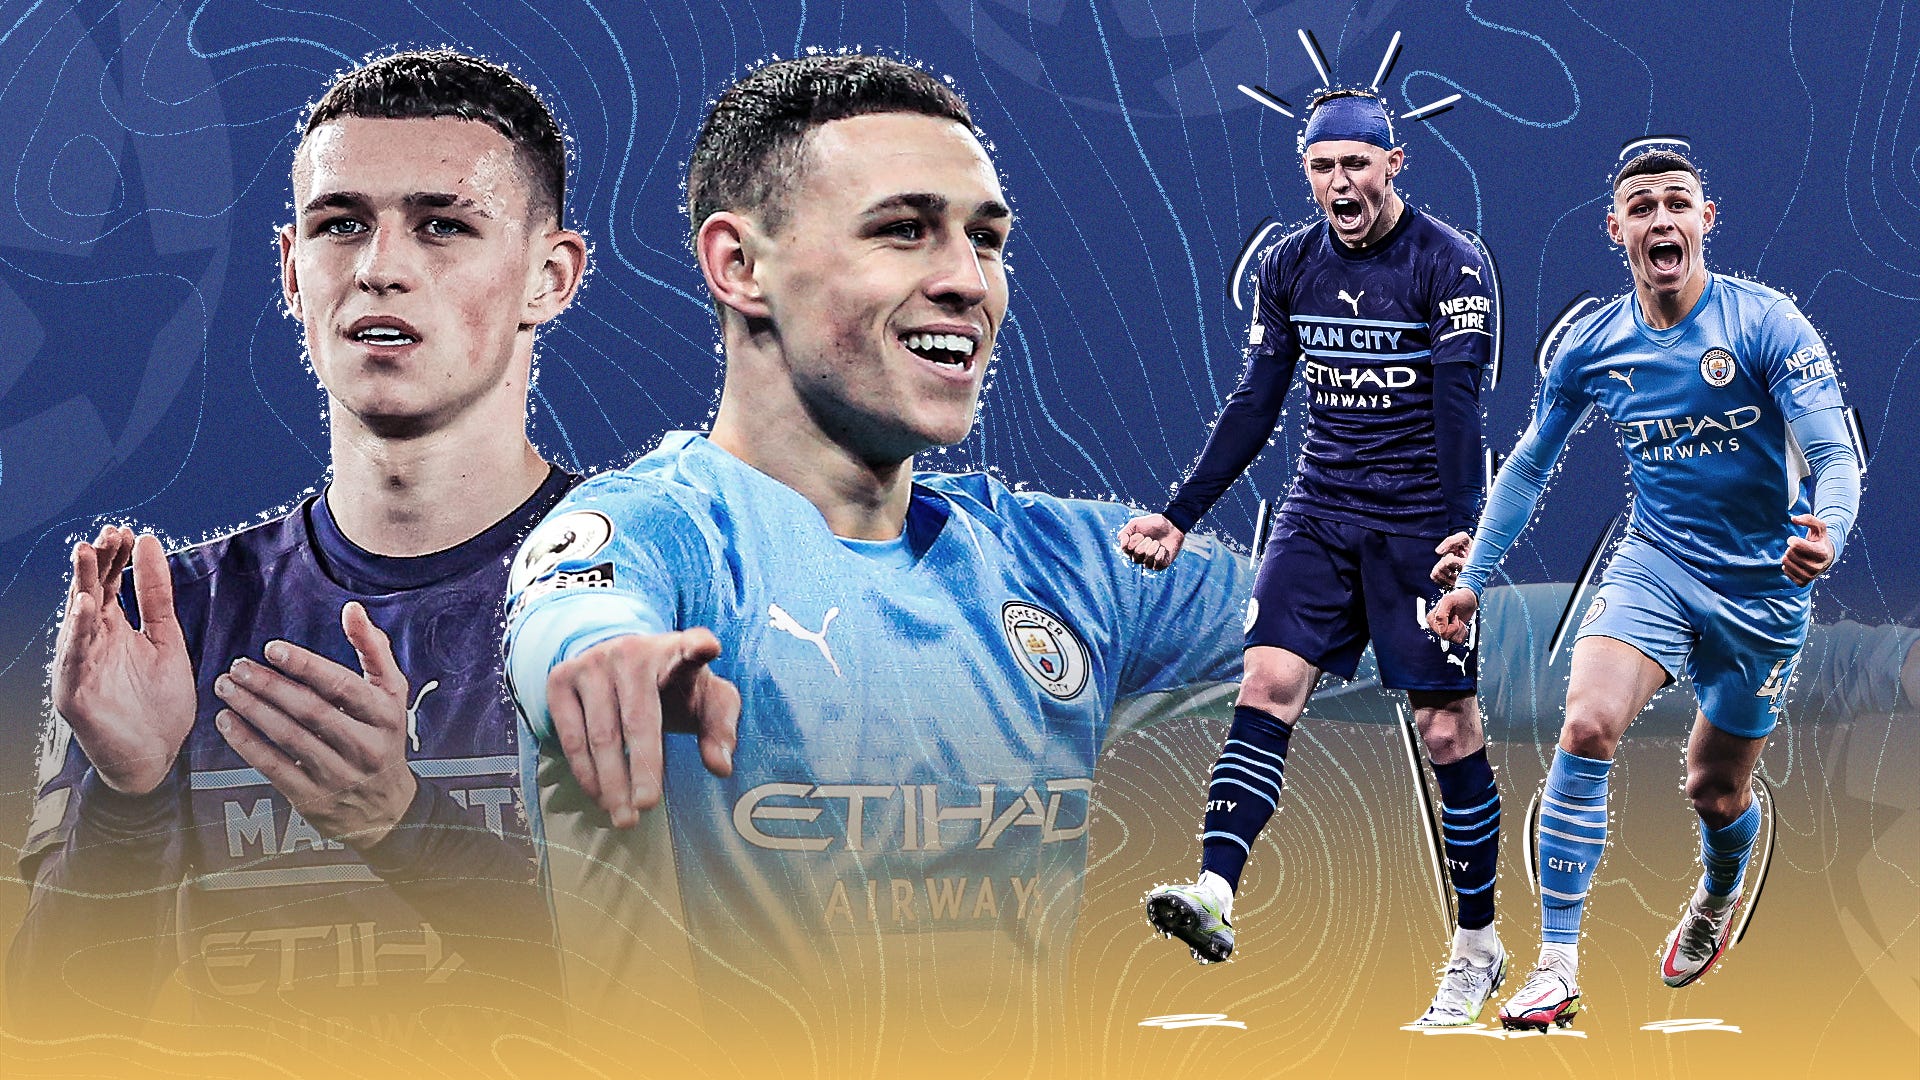 TECNO Mobile  𝗚𝗢𝗟𝗗𝗘𝗡 𝗕𝗢𝗬  Get your hands on this weeks  wallpaper starring mancity superstar Phil Foden  Screenshot our story  to get one for yourself AnnounceYourself StopAtNothing ManCity  ManchesterCity PhilFoden 